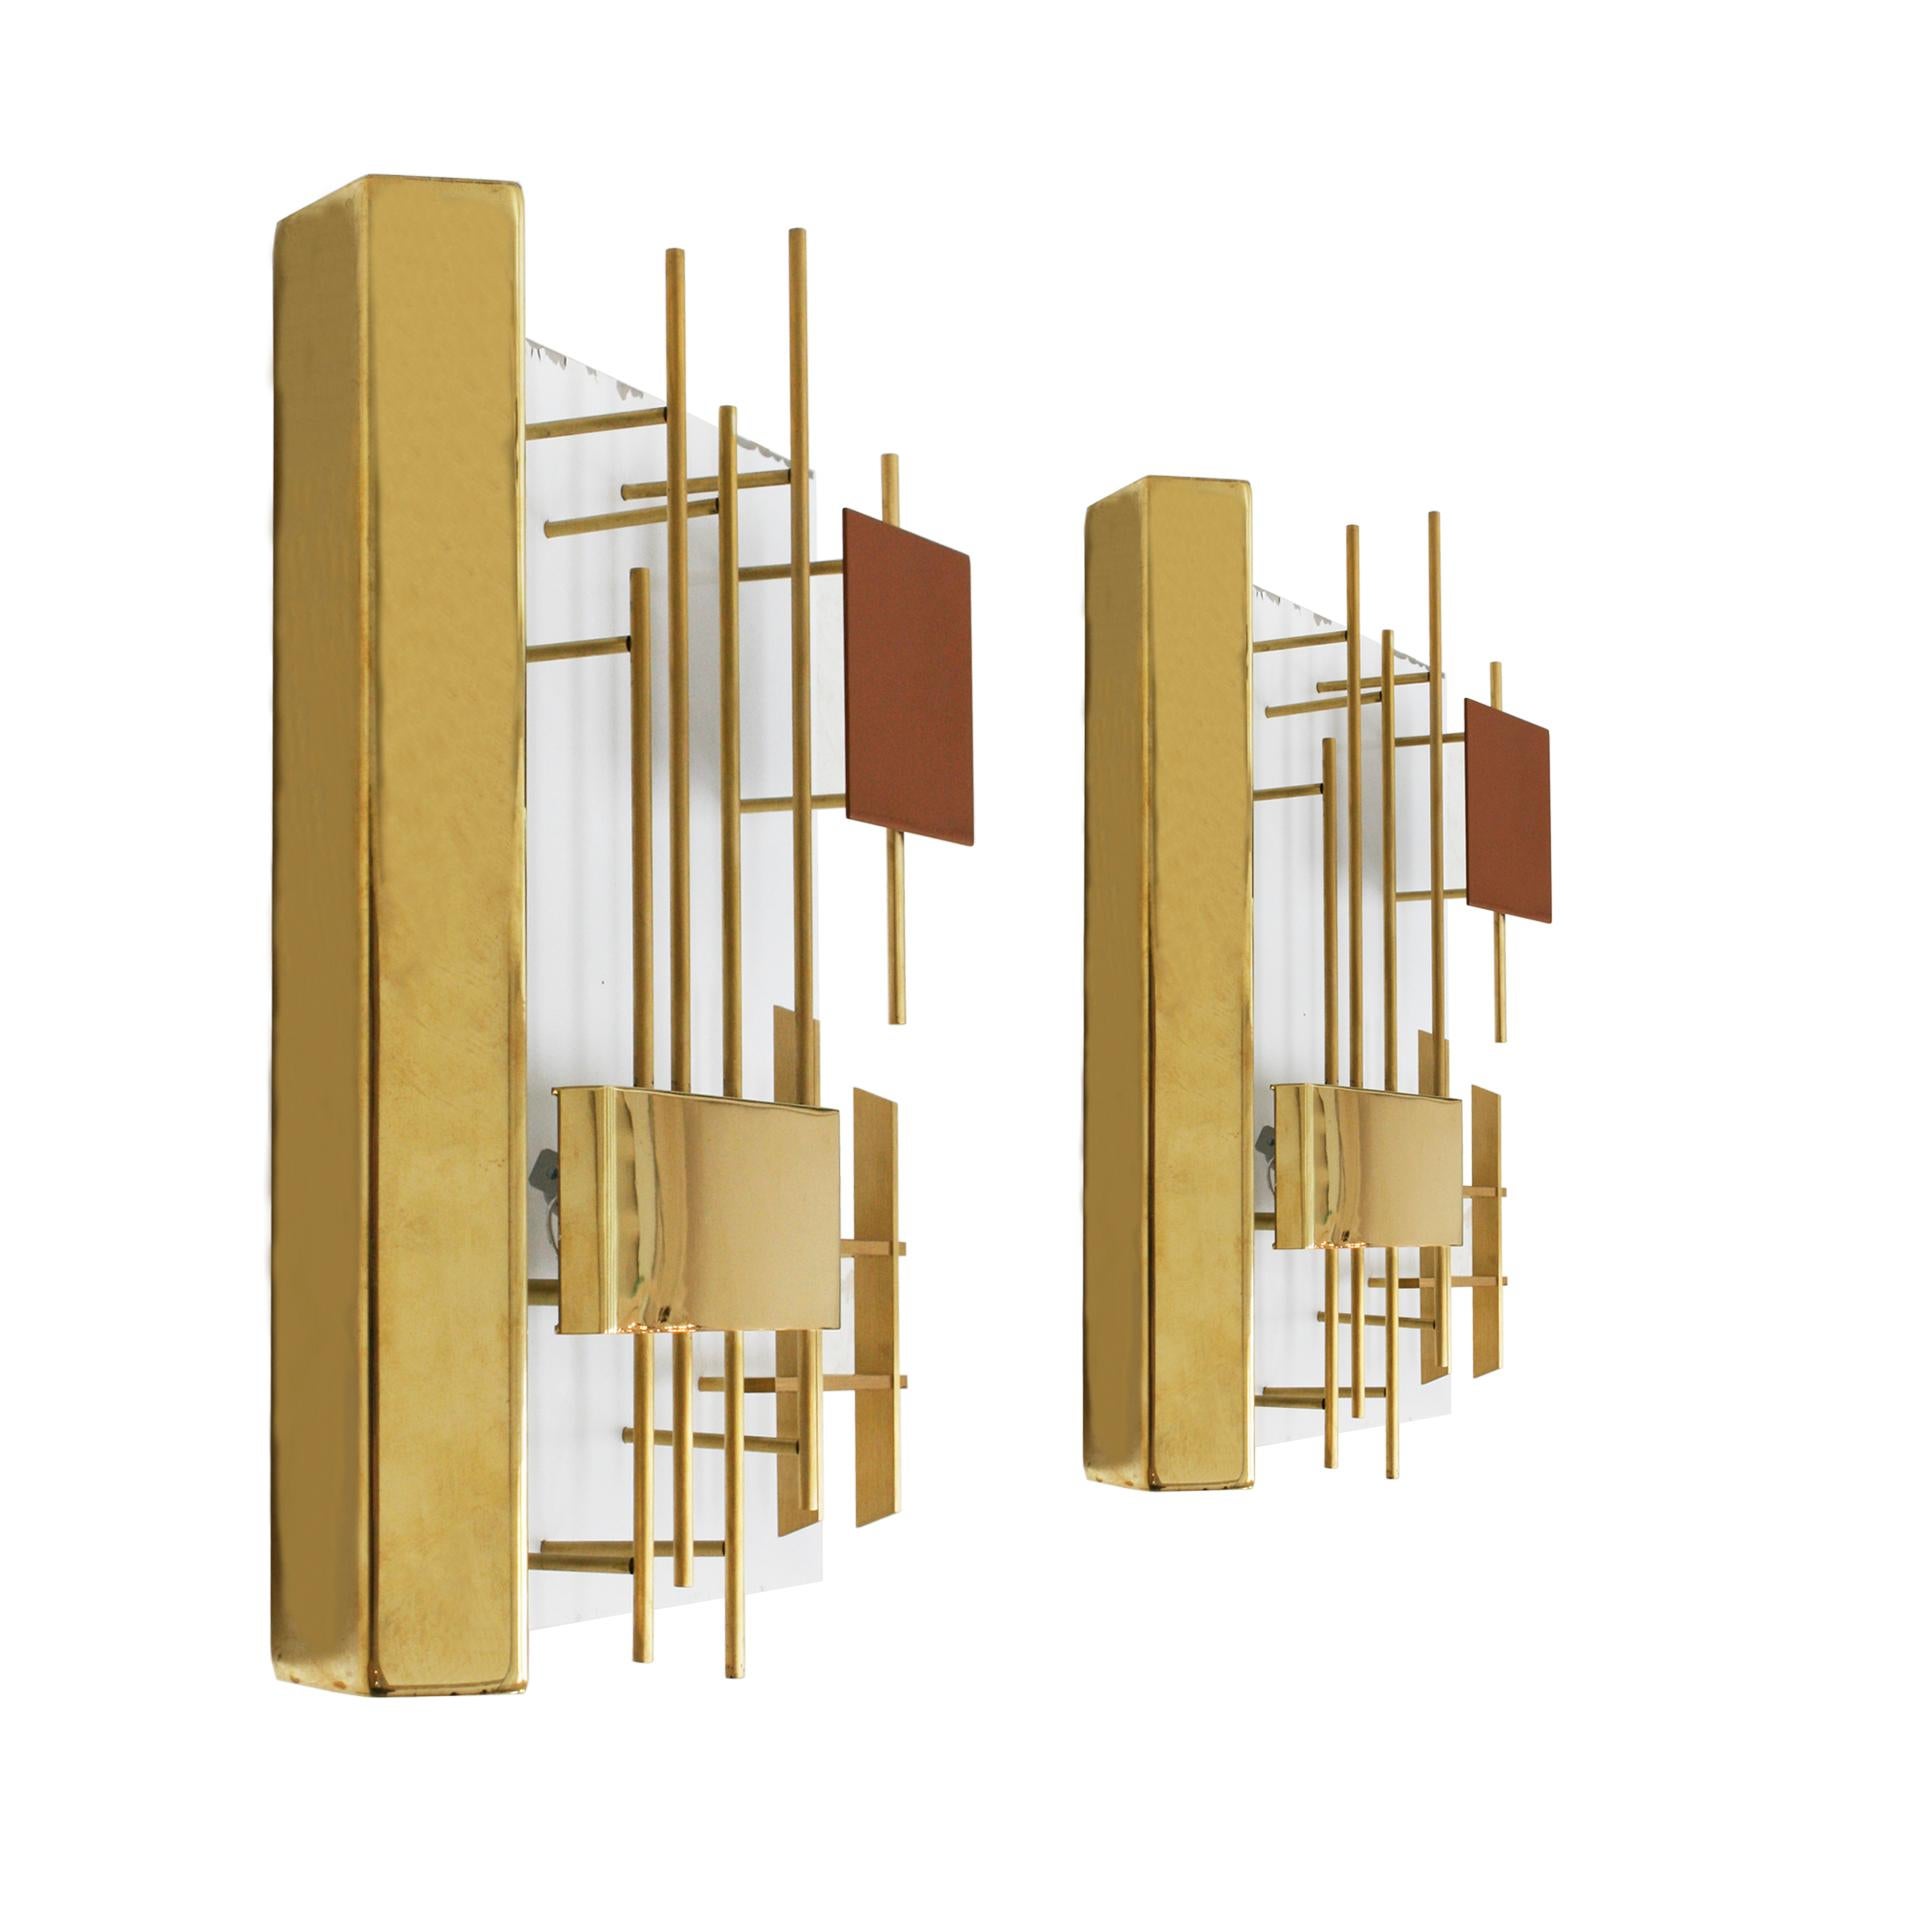 Pair of original model 575 sconces designed by Gio Ponti and edited by Lumi. Lacquered steel structure with brass detailing and Lumi stamp in the back. Italy, 1960s.

Our main target is customer satisfaction, so we include in the price for this